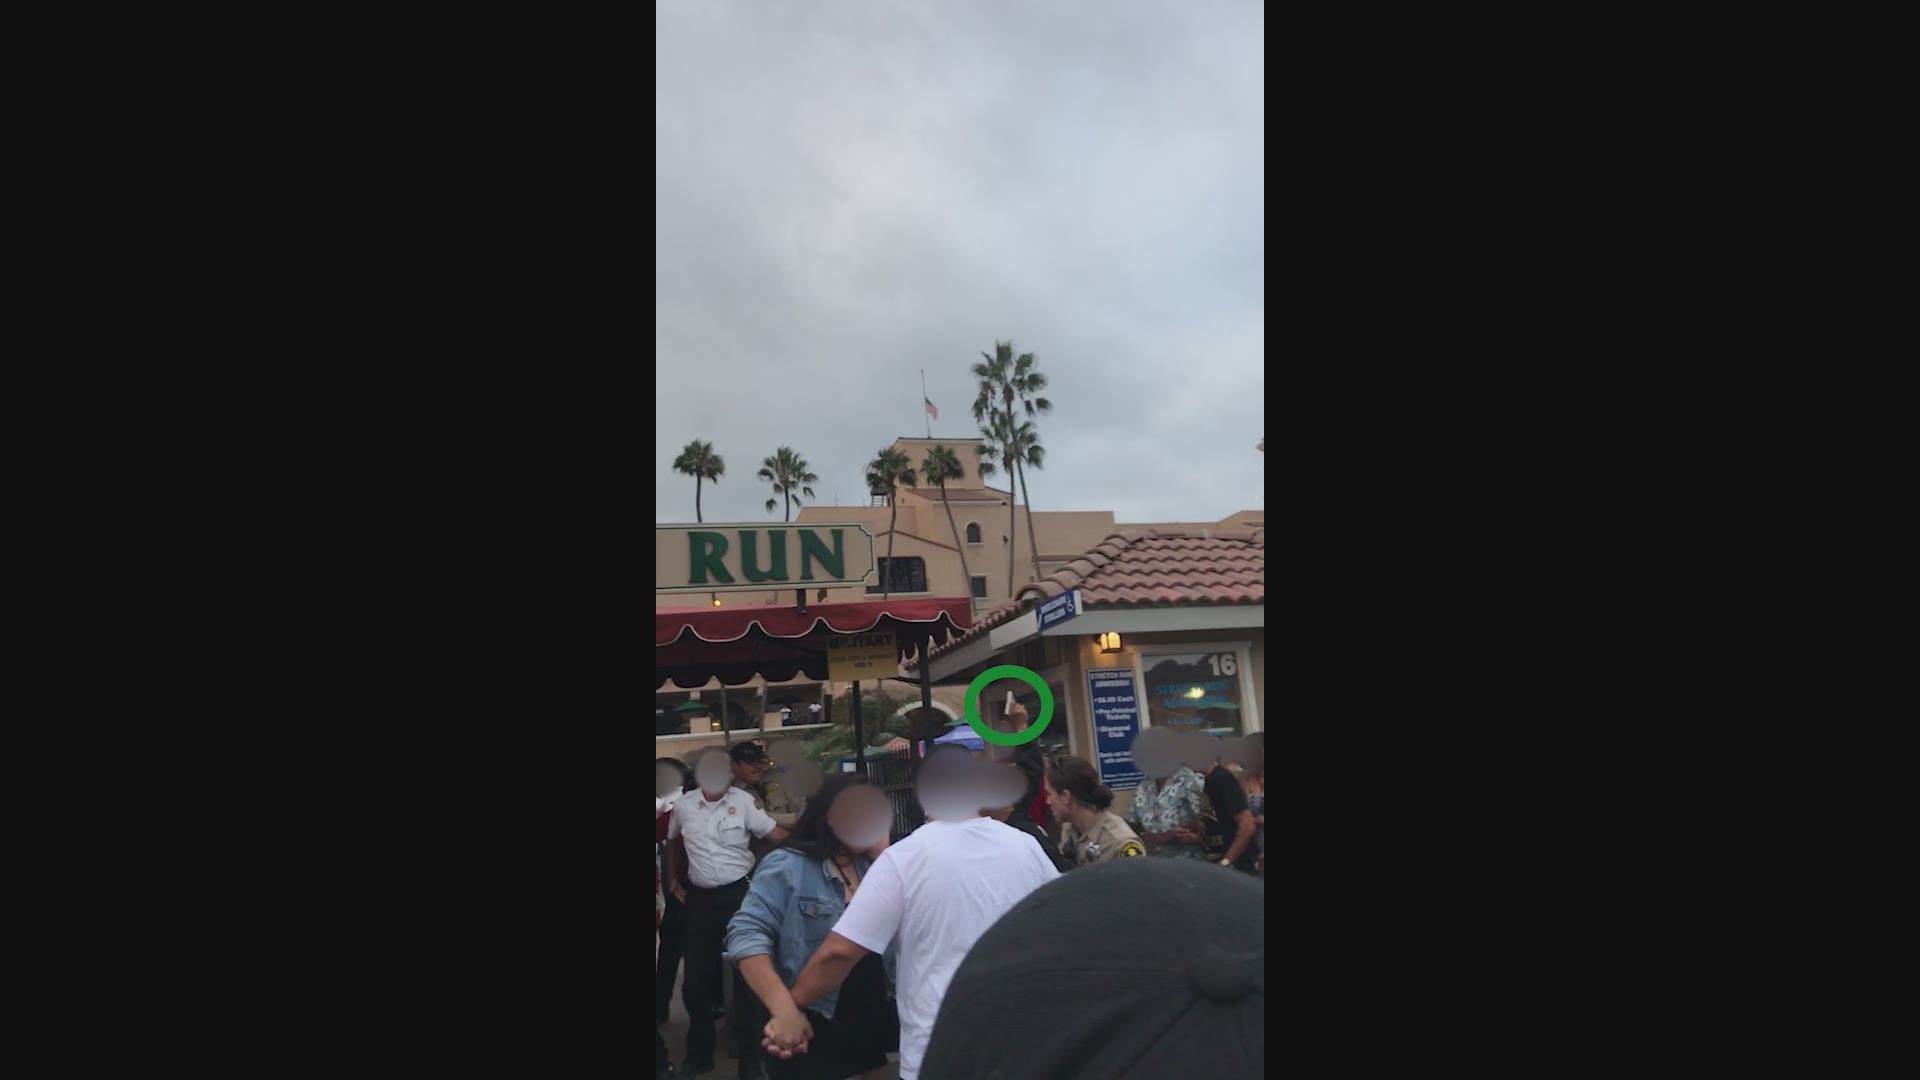 No deputy body-worn camera footage captured the shooting. Civilian cell phone video footage depicts
chaos at the gates of the Del Mar Fairgrounds.